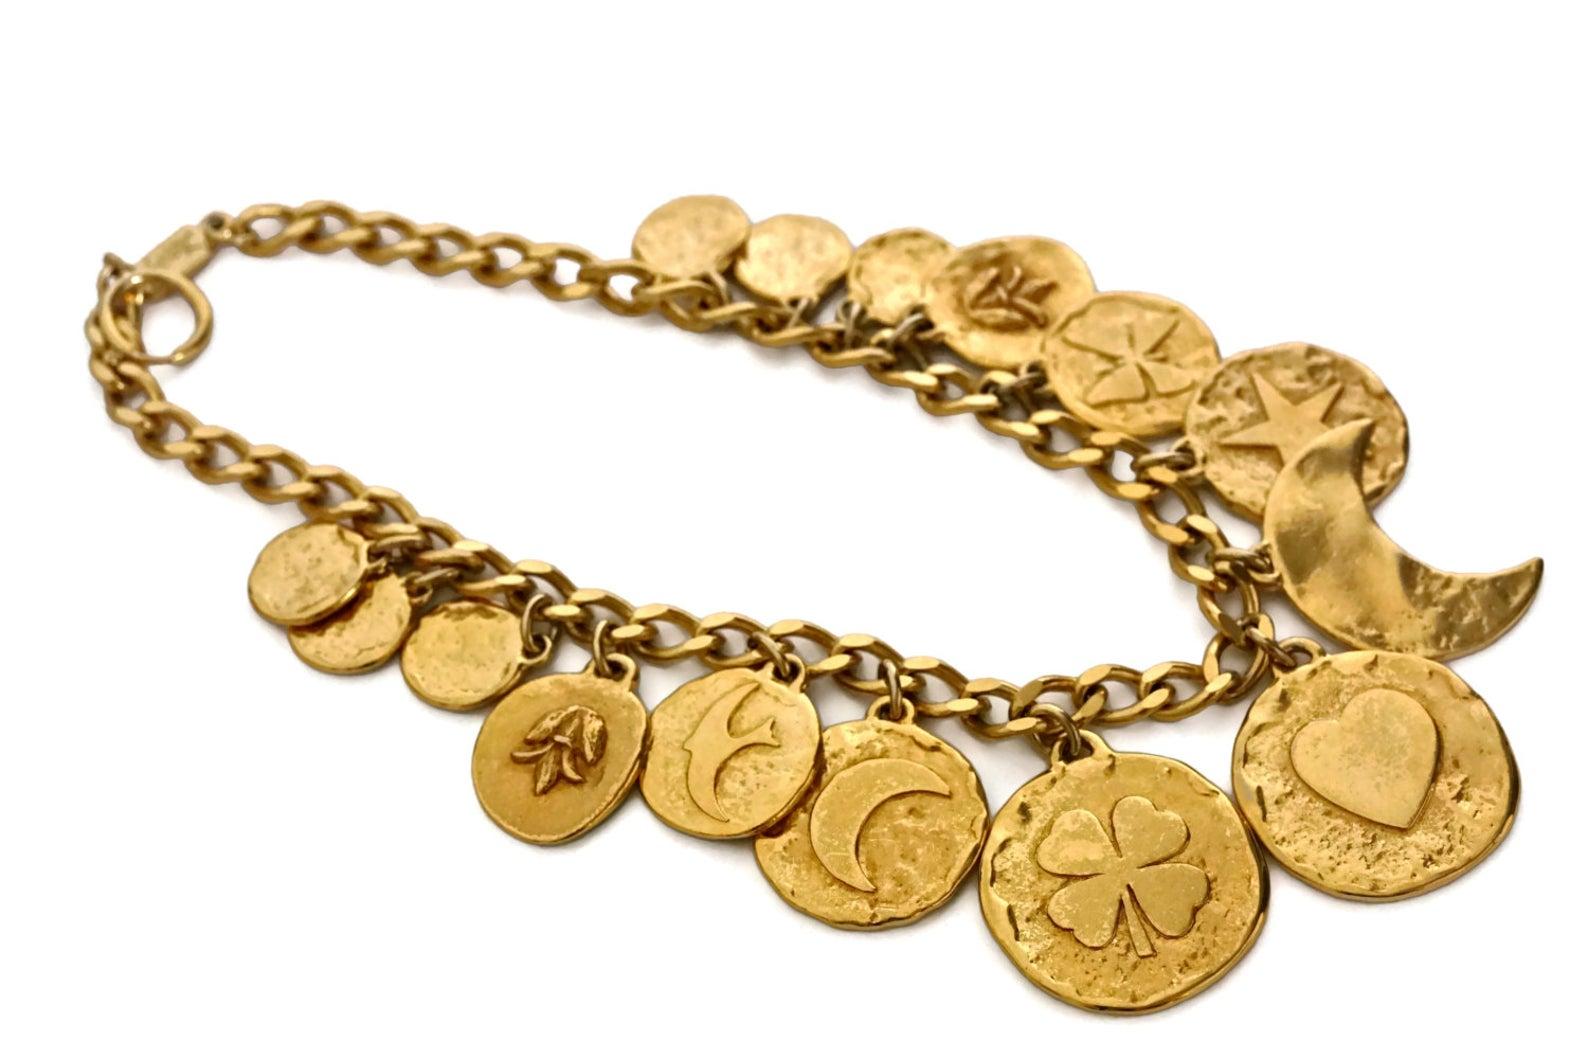 Vintage YVES SAINT LAURENT Iconic Charm Necklace

Measurements:
Height: 2 1/8 inches
Wearable Length: 17 inches (maximum)

Features:
- 100% Authentic YVES SAINT LAURENT.
- Chunky discs with iconic heart, star, moon and clover symbols.
- Adjustable